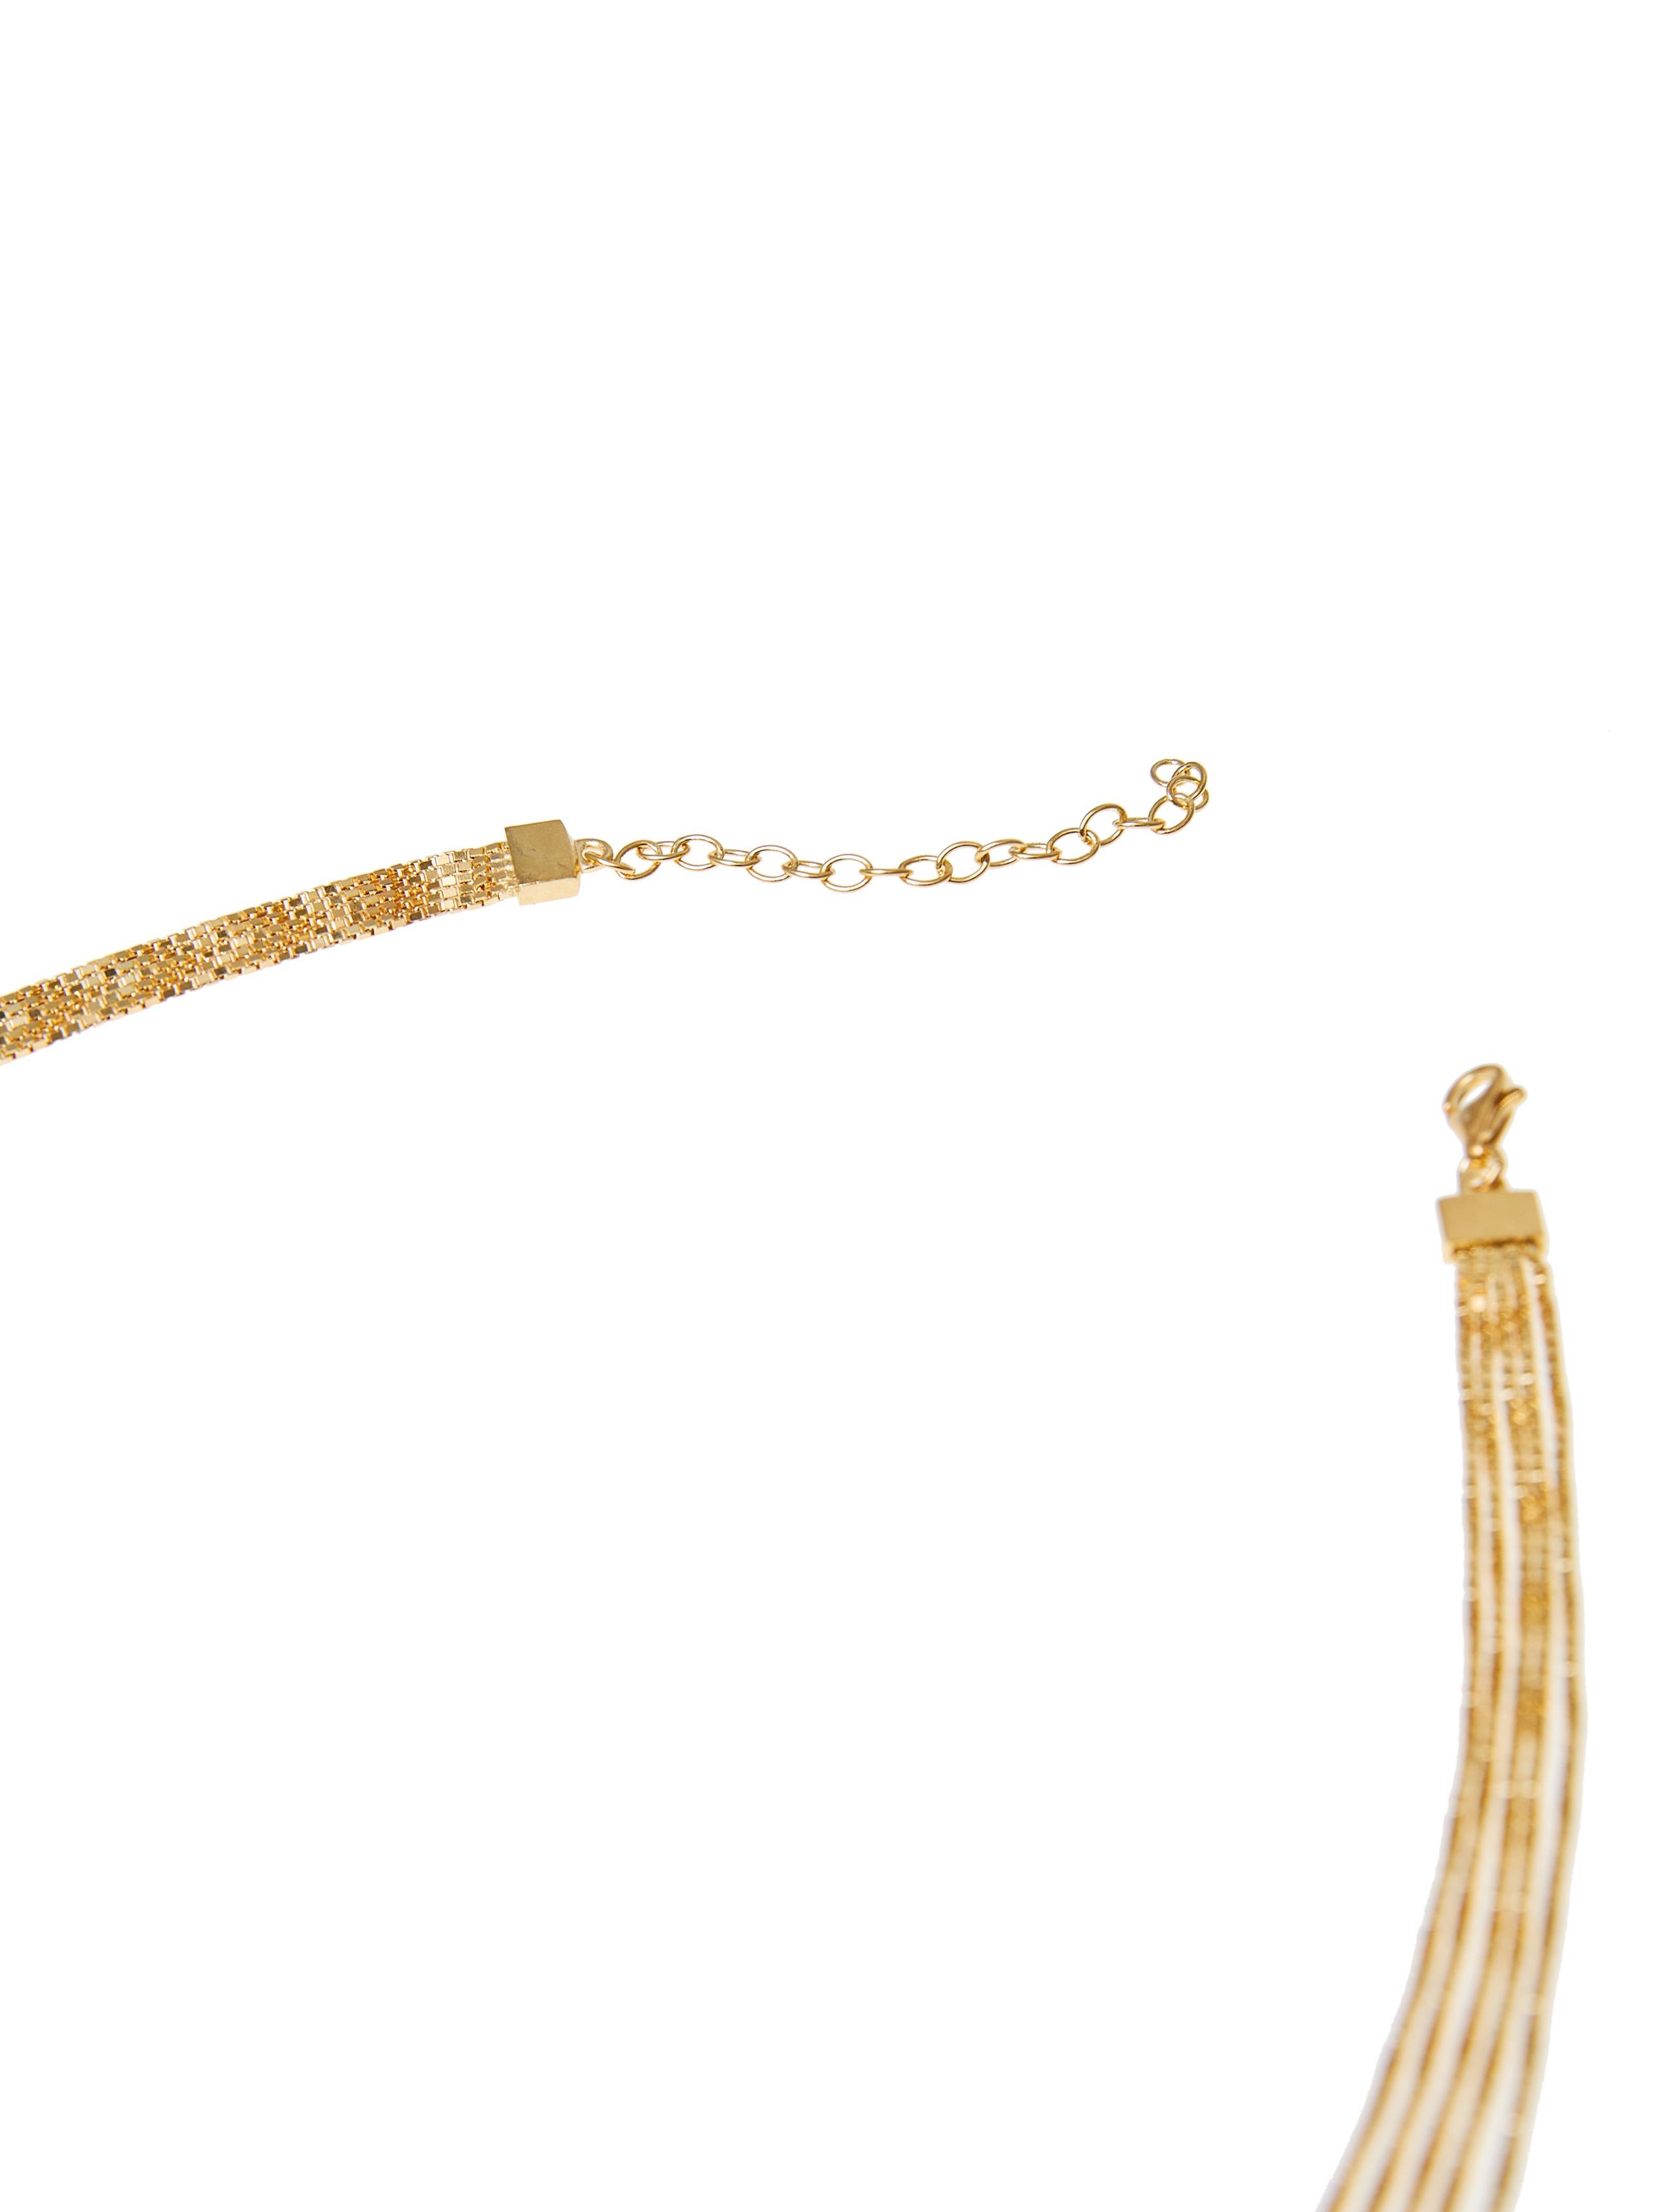 Necklace Minimal Long Box Chain Shiny 18 Karat Gold-Plated Silver Greek For Sale 1